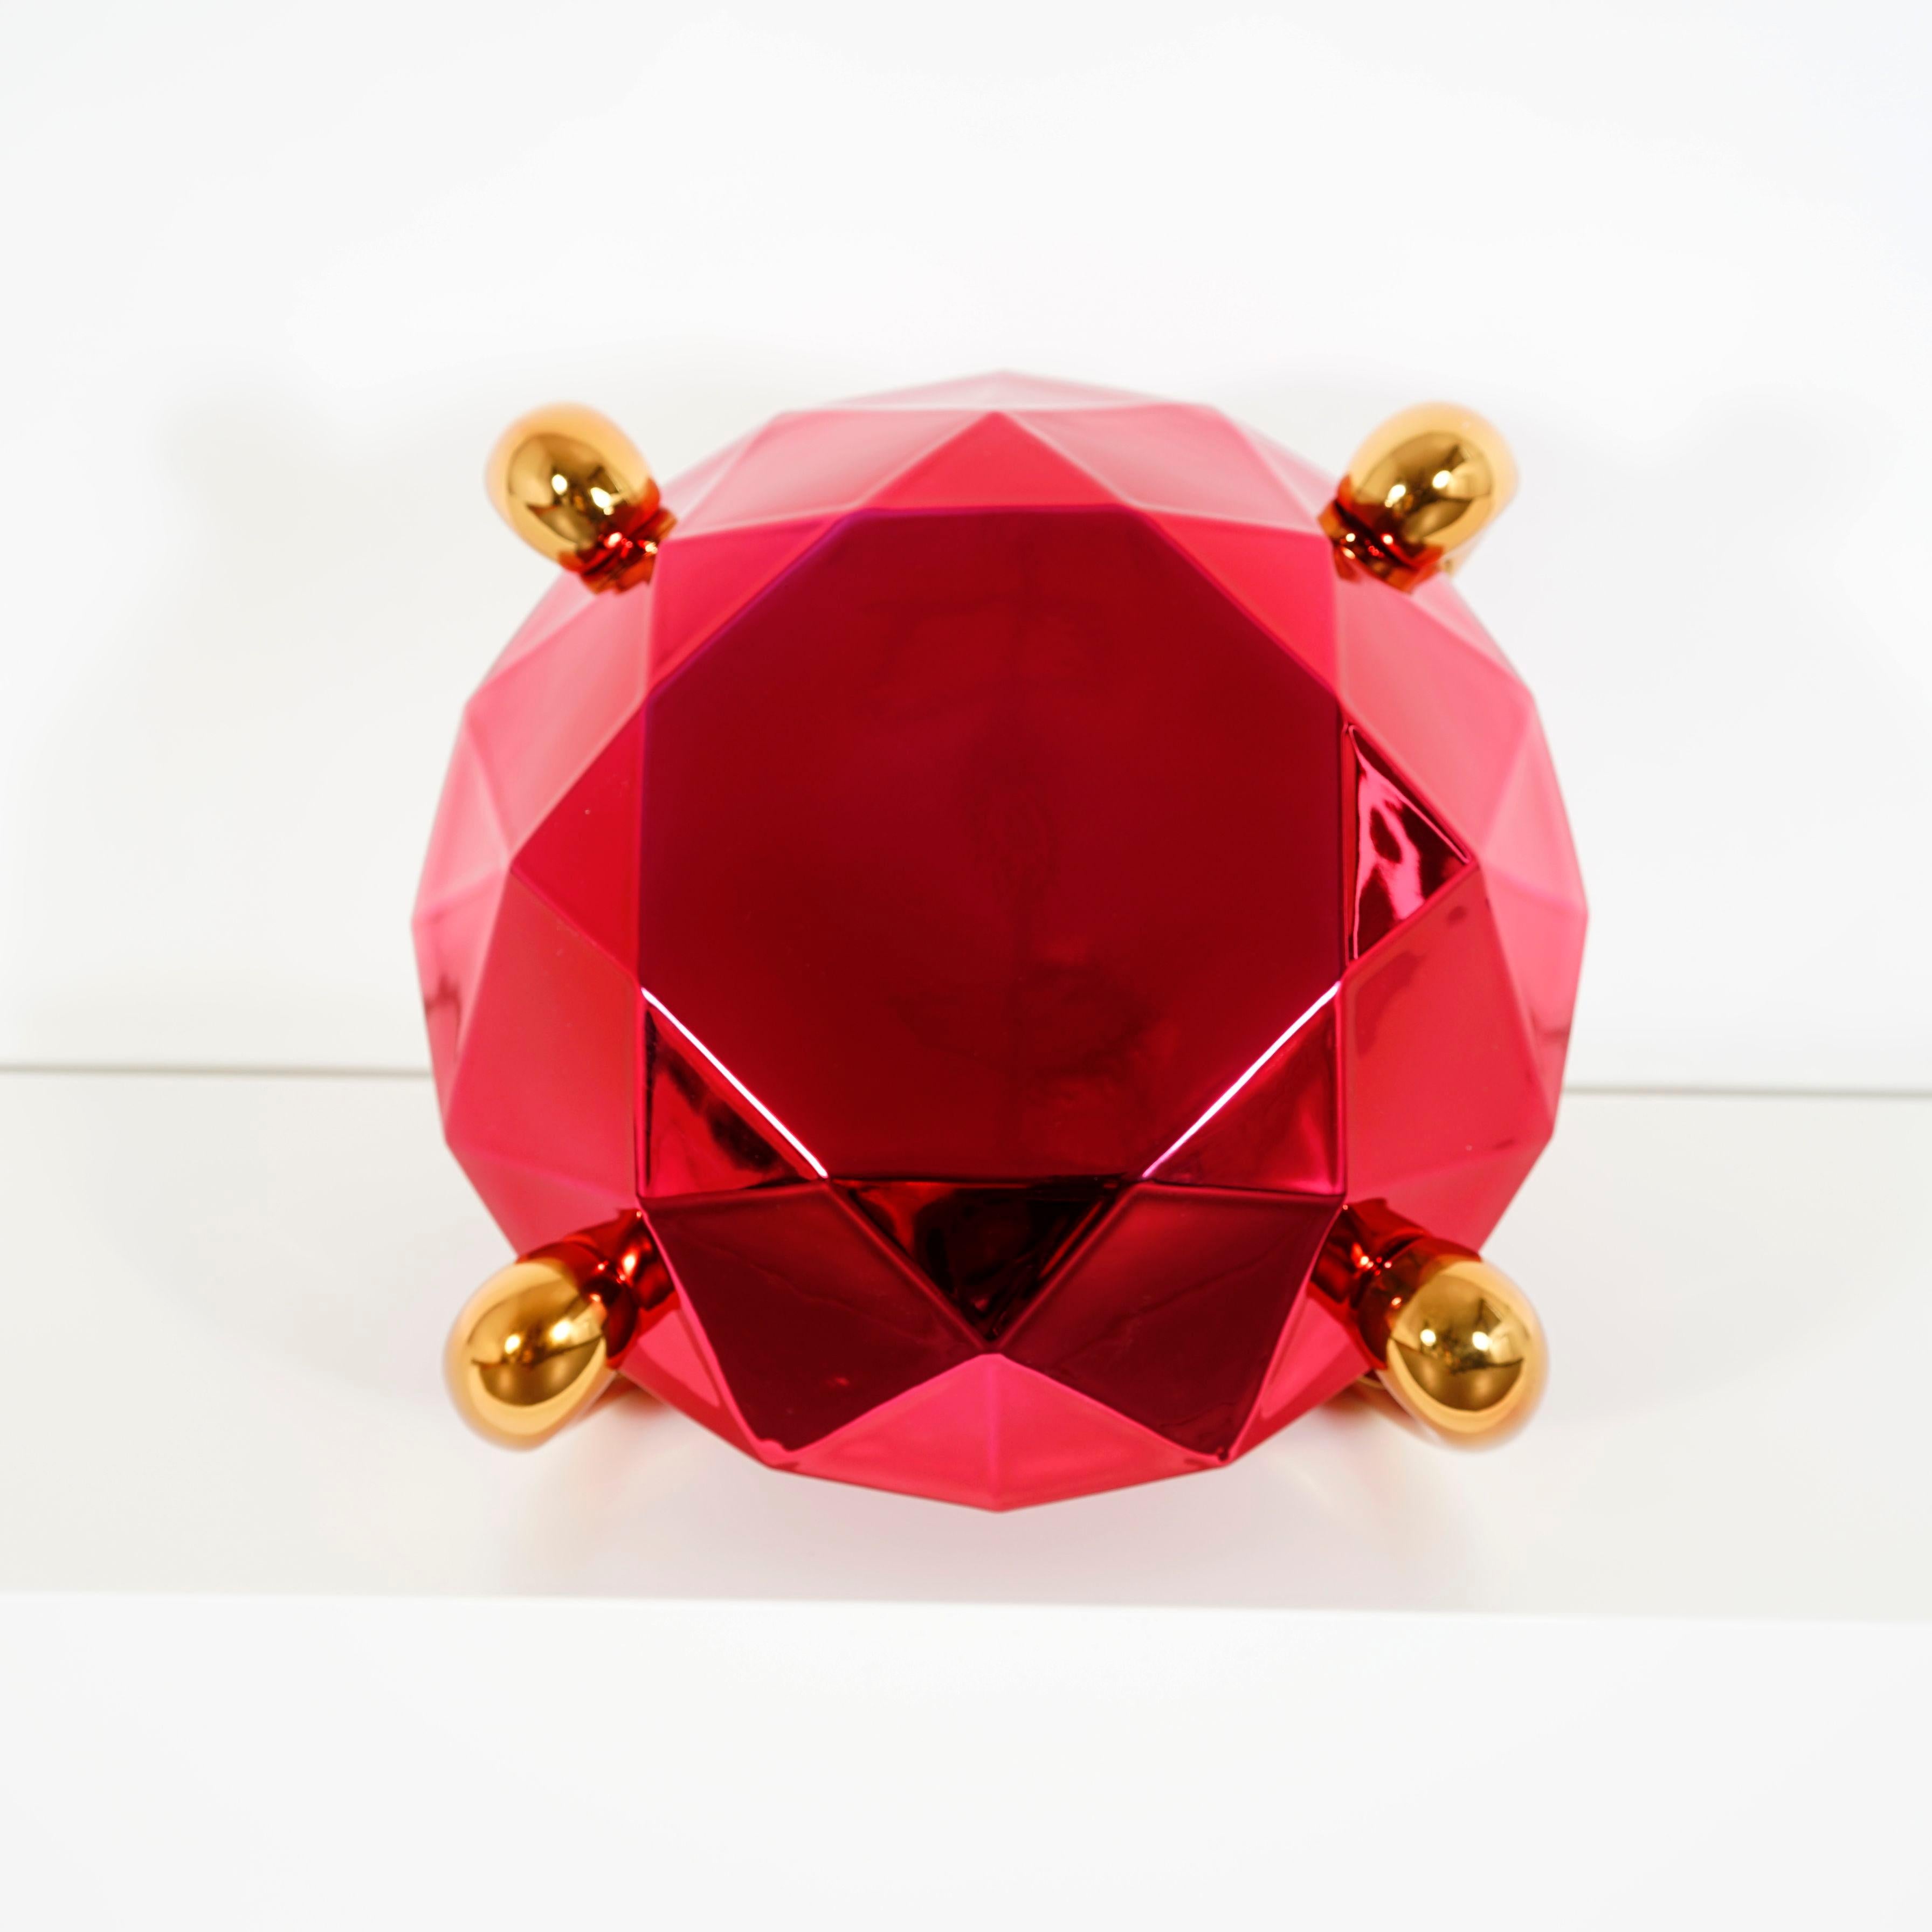 The Diamonds  Collectors' set with matching numbers - Pop Art Sculpture by Jeff Koons